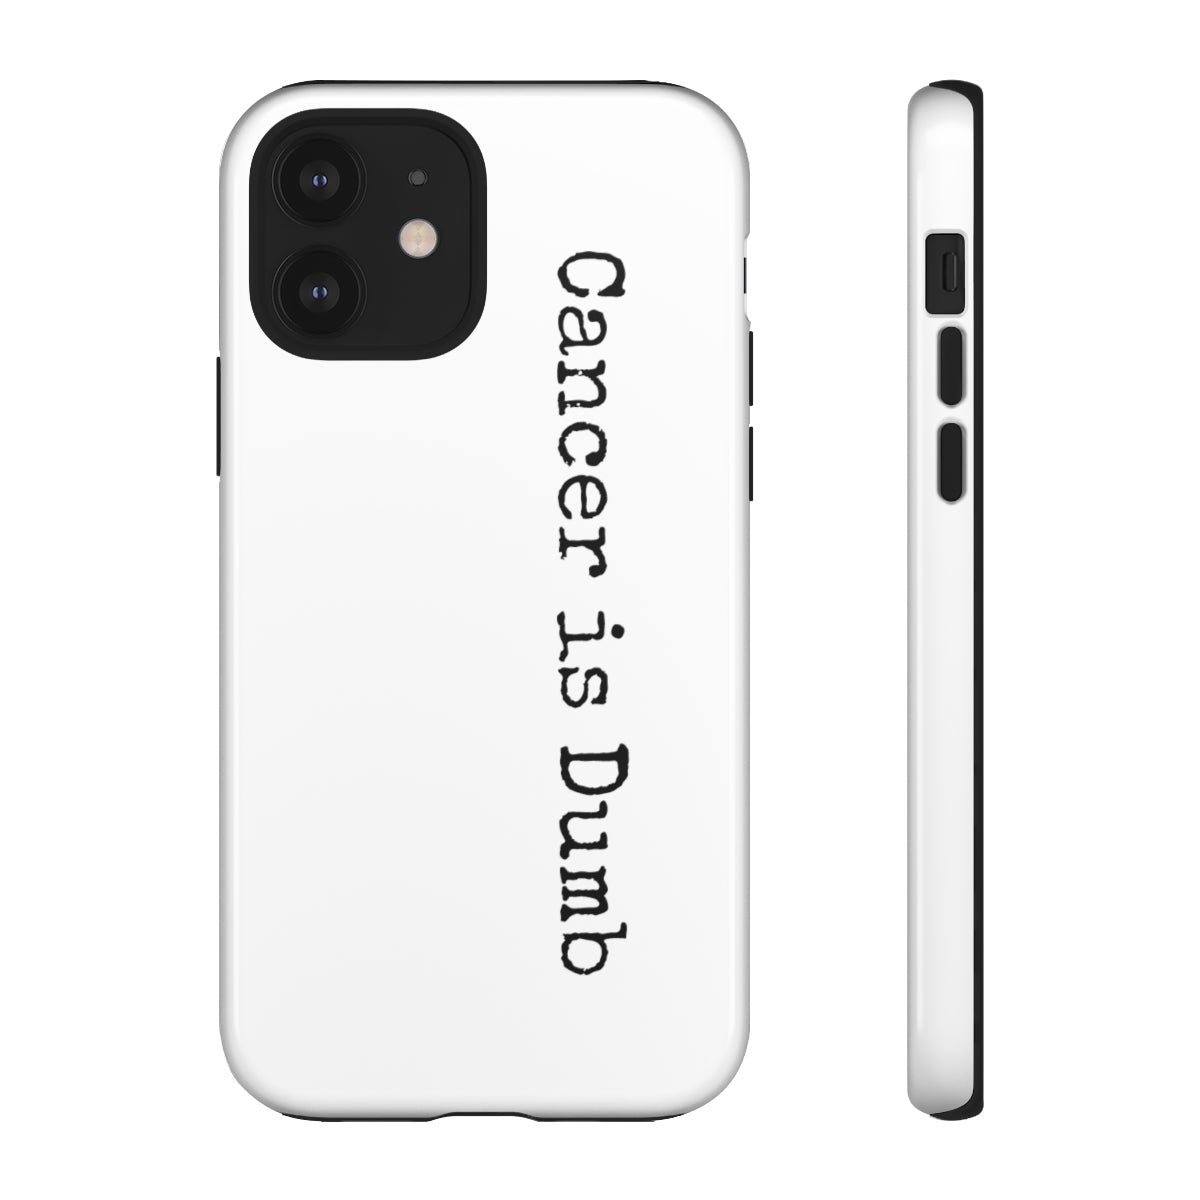 Tough Cases Phone Case Anti Cancer Cancer is Dumb Survivor Support Humorous Funny